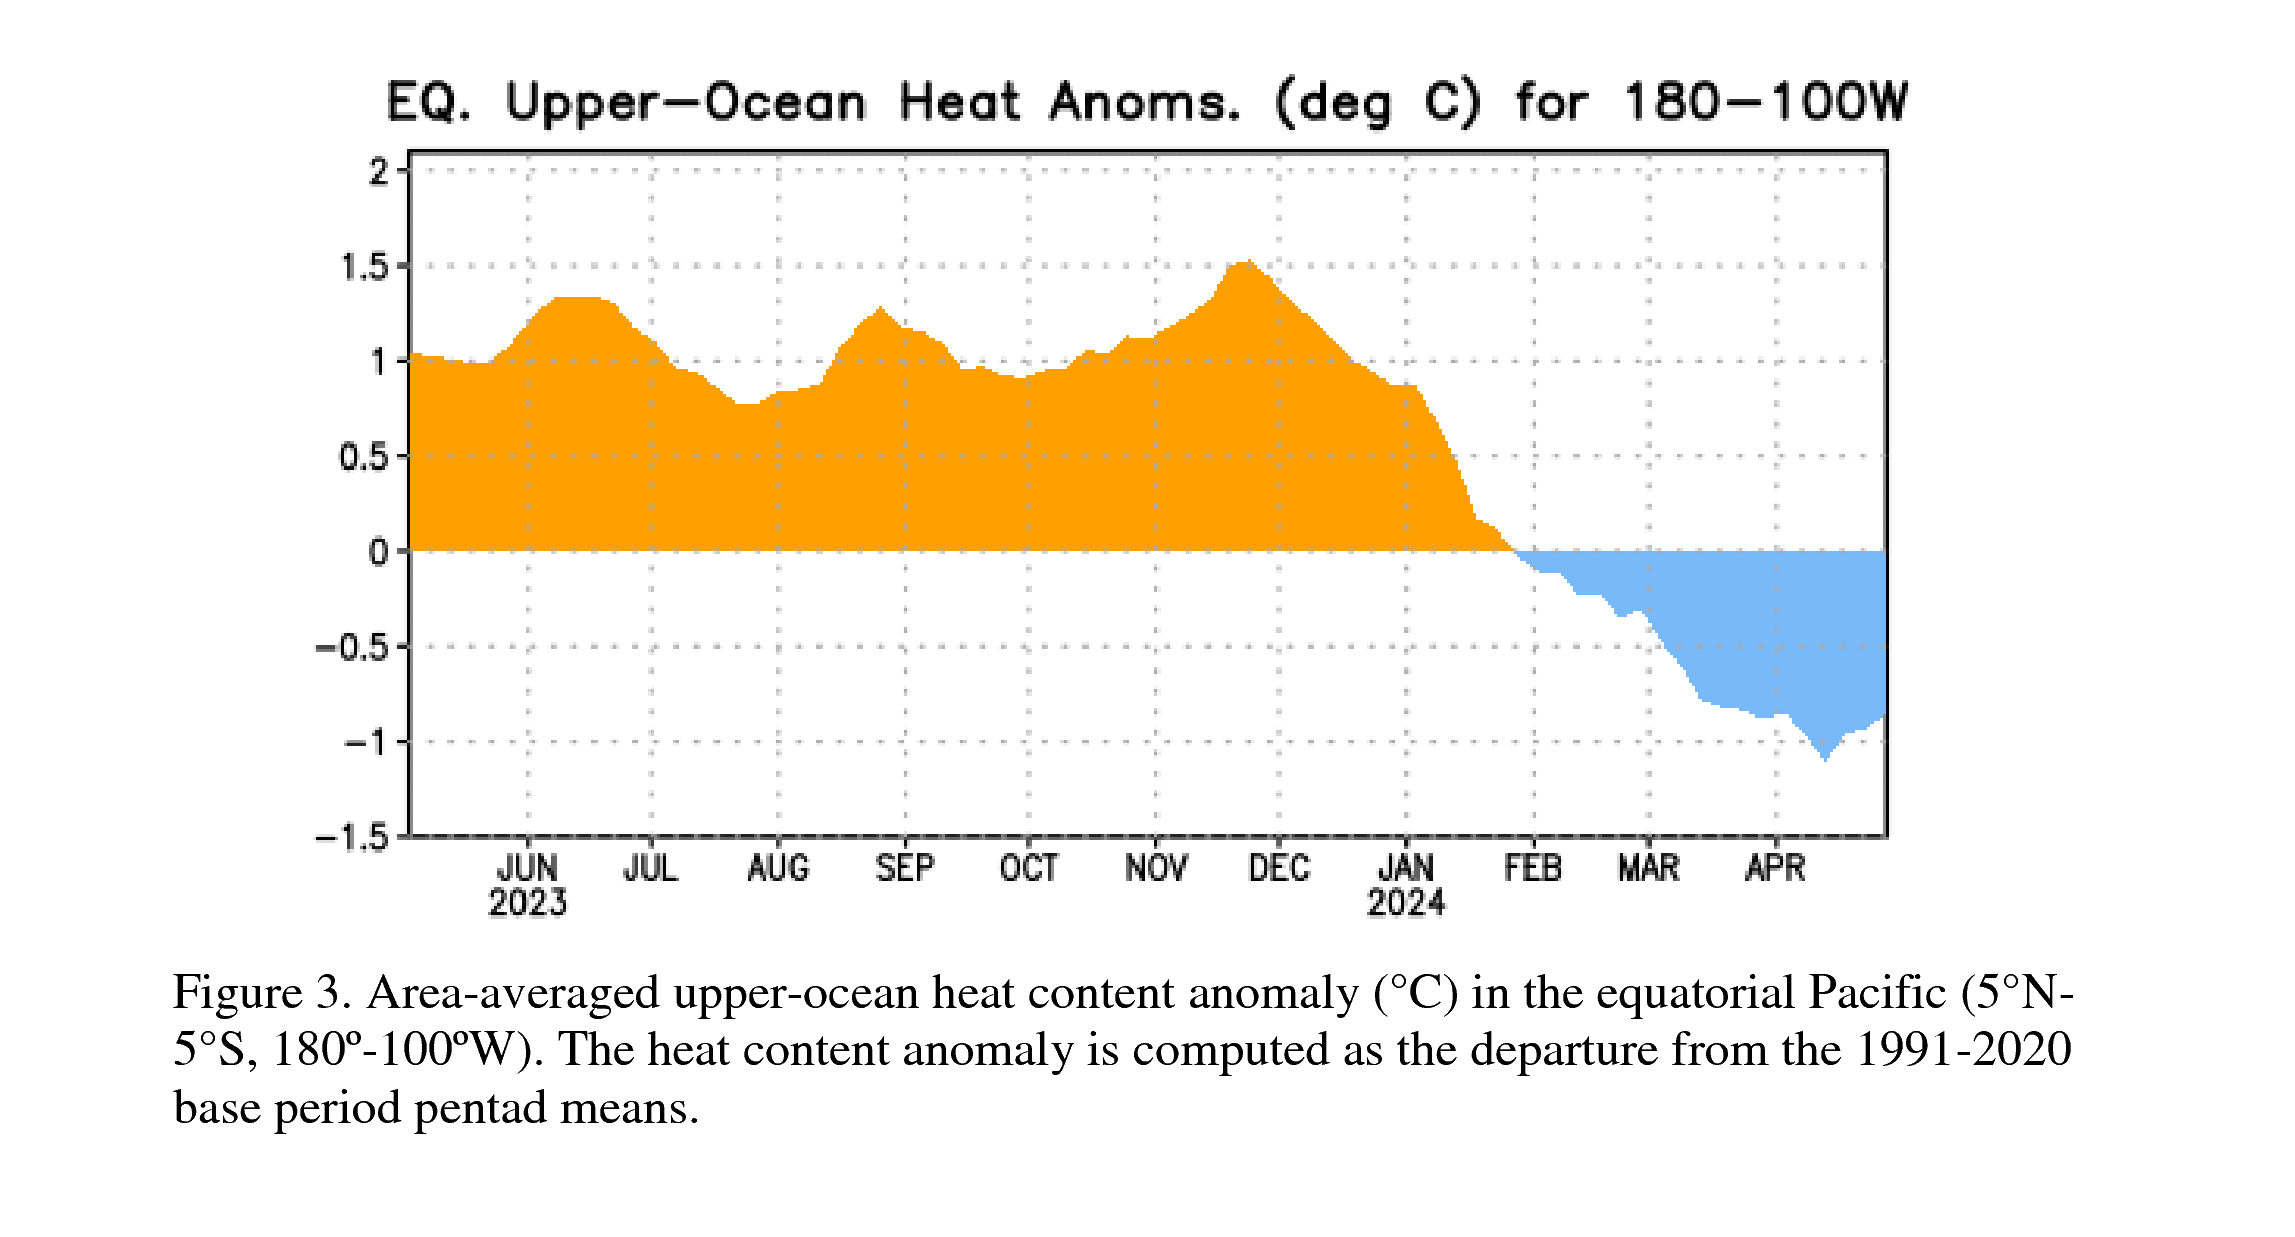 http://www.cpc.ncep.noaa.gov/products/analysis_monitoring/enso_advisory/figure03.gif